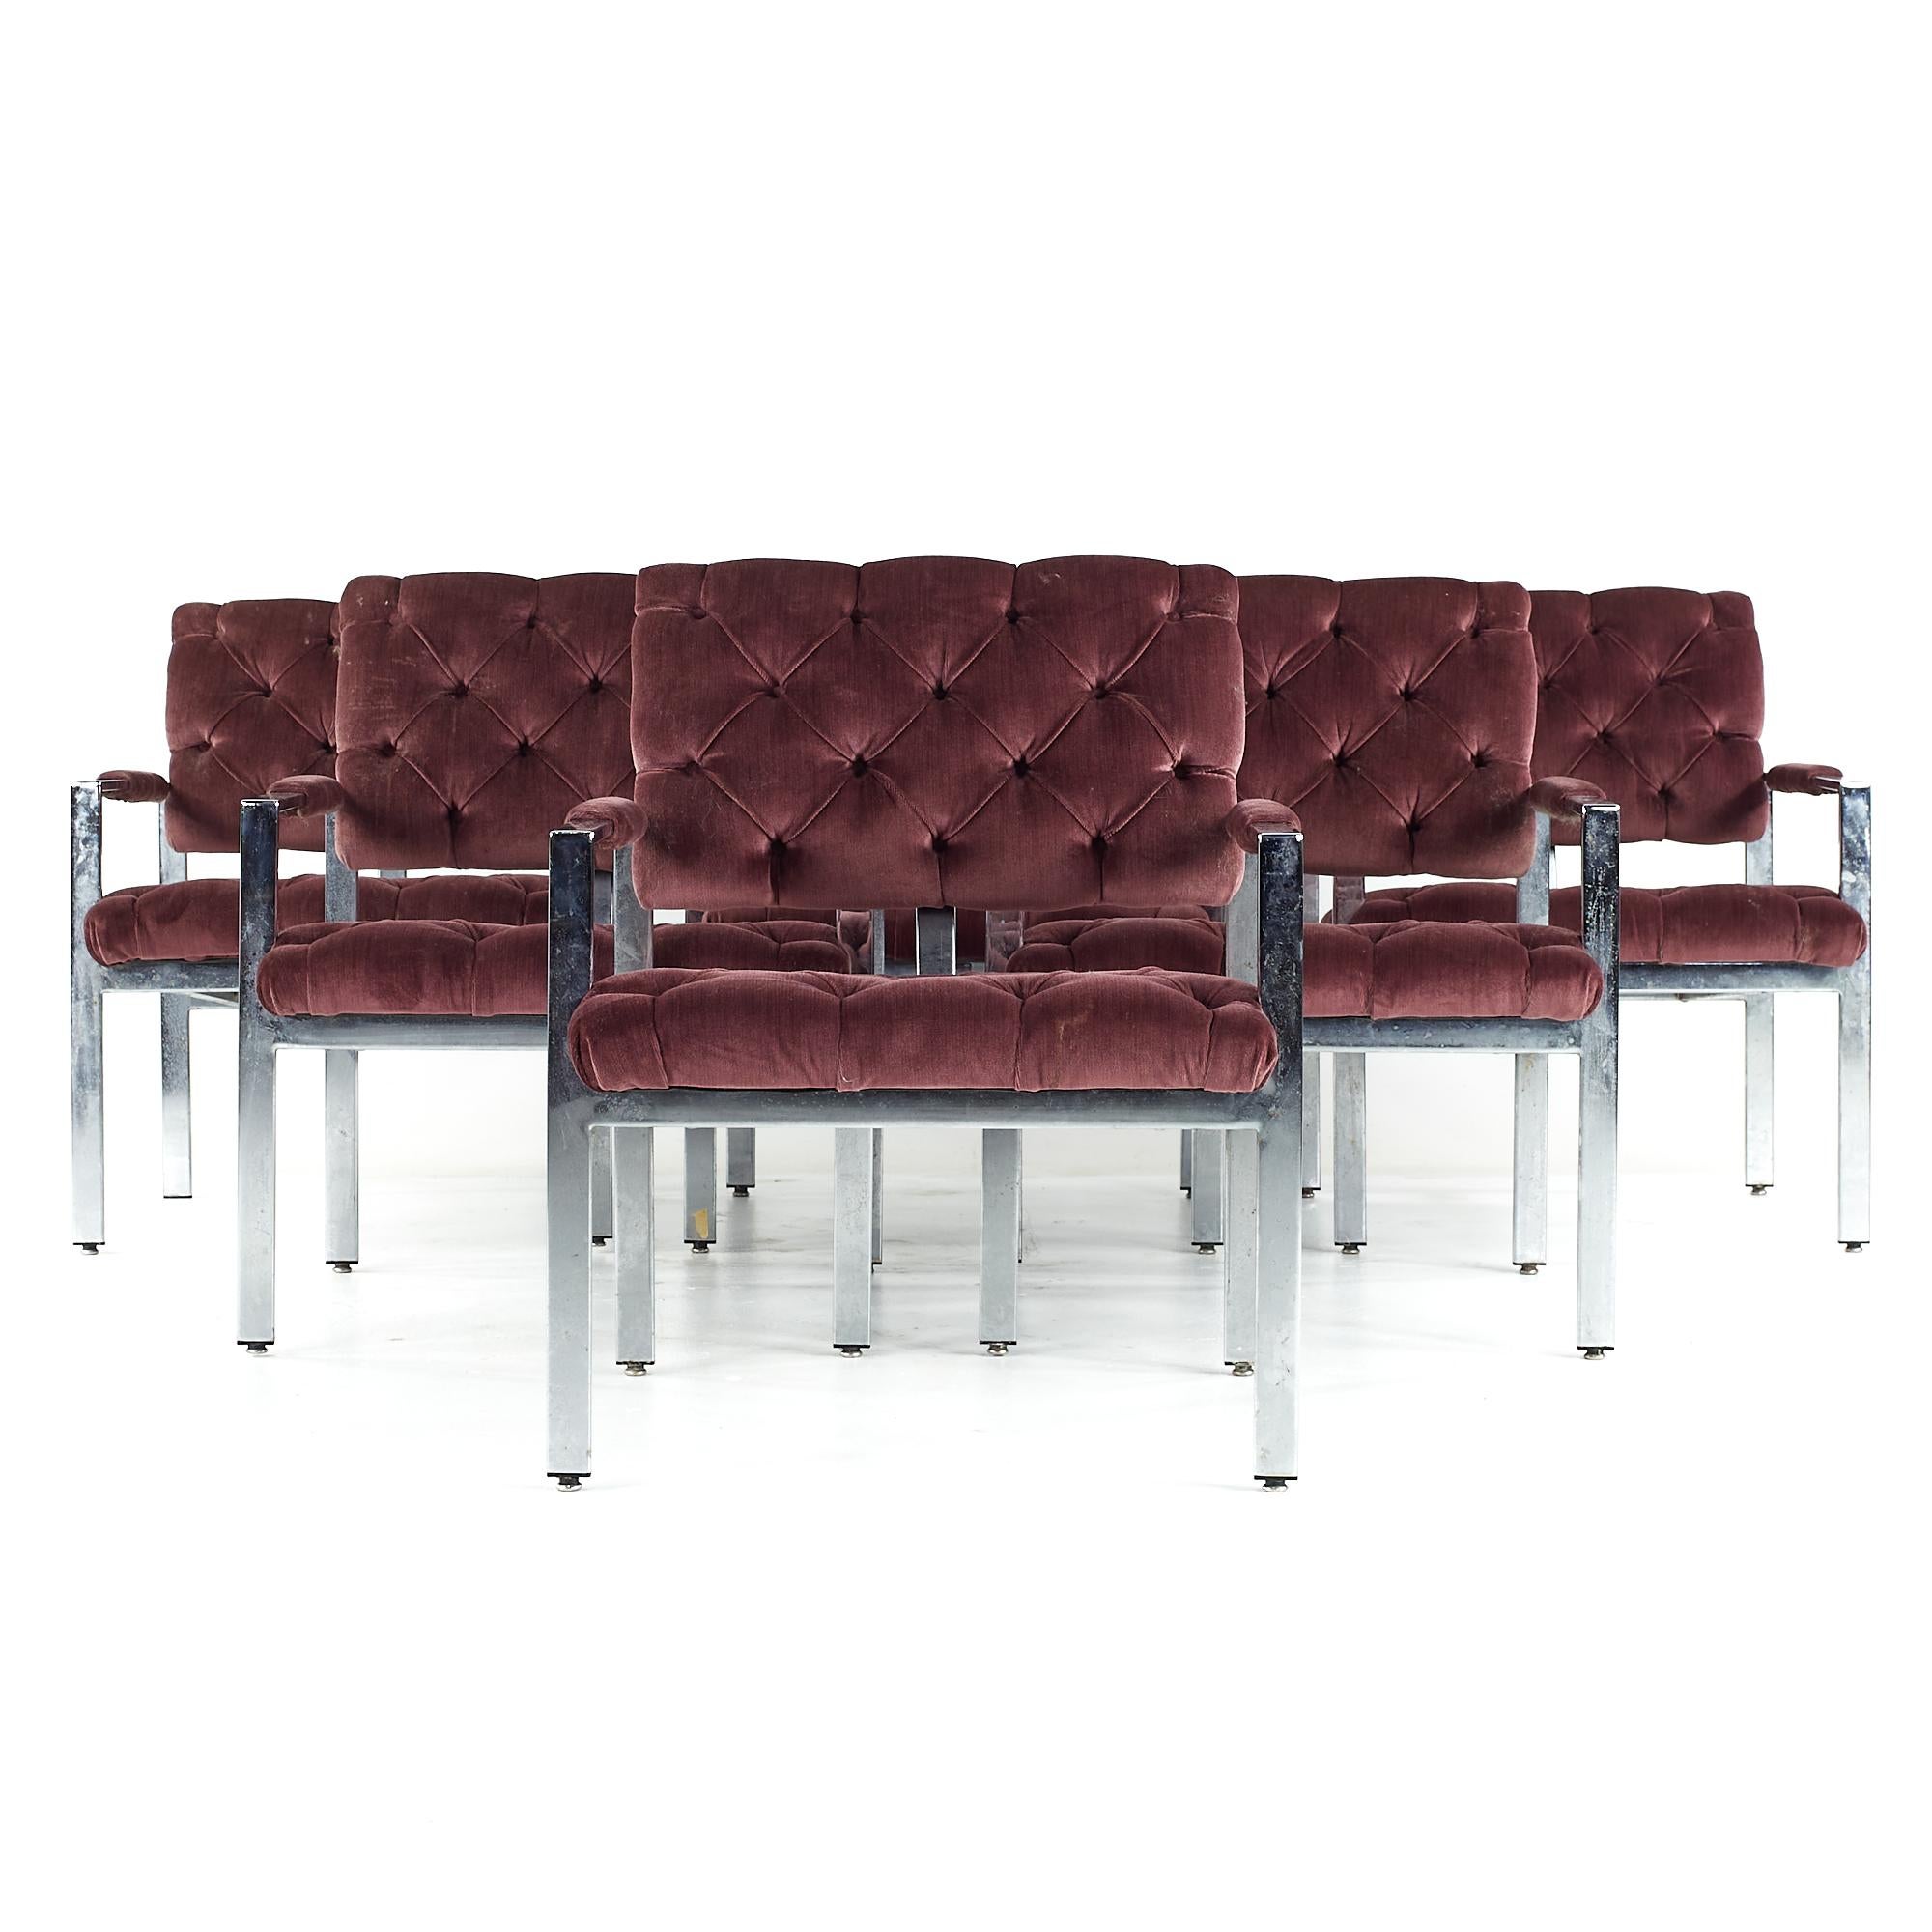 Milo Baughman for Thayer Coggin midcentury Chrome Tufted Arm Chairs – Set of 6

Each chair measures: 25.75 wide x 28.5 deep x 31.5 inches high, with a seat height of 17 and arm height/chair clearance of 22.5 inches

All pieces of furniture can